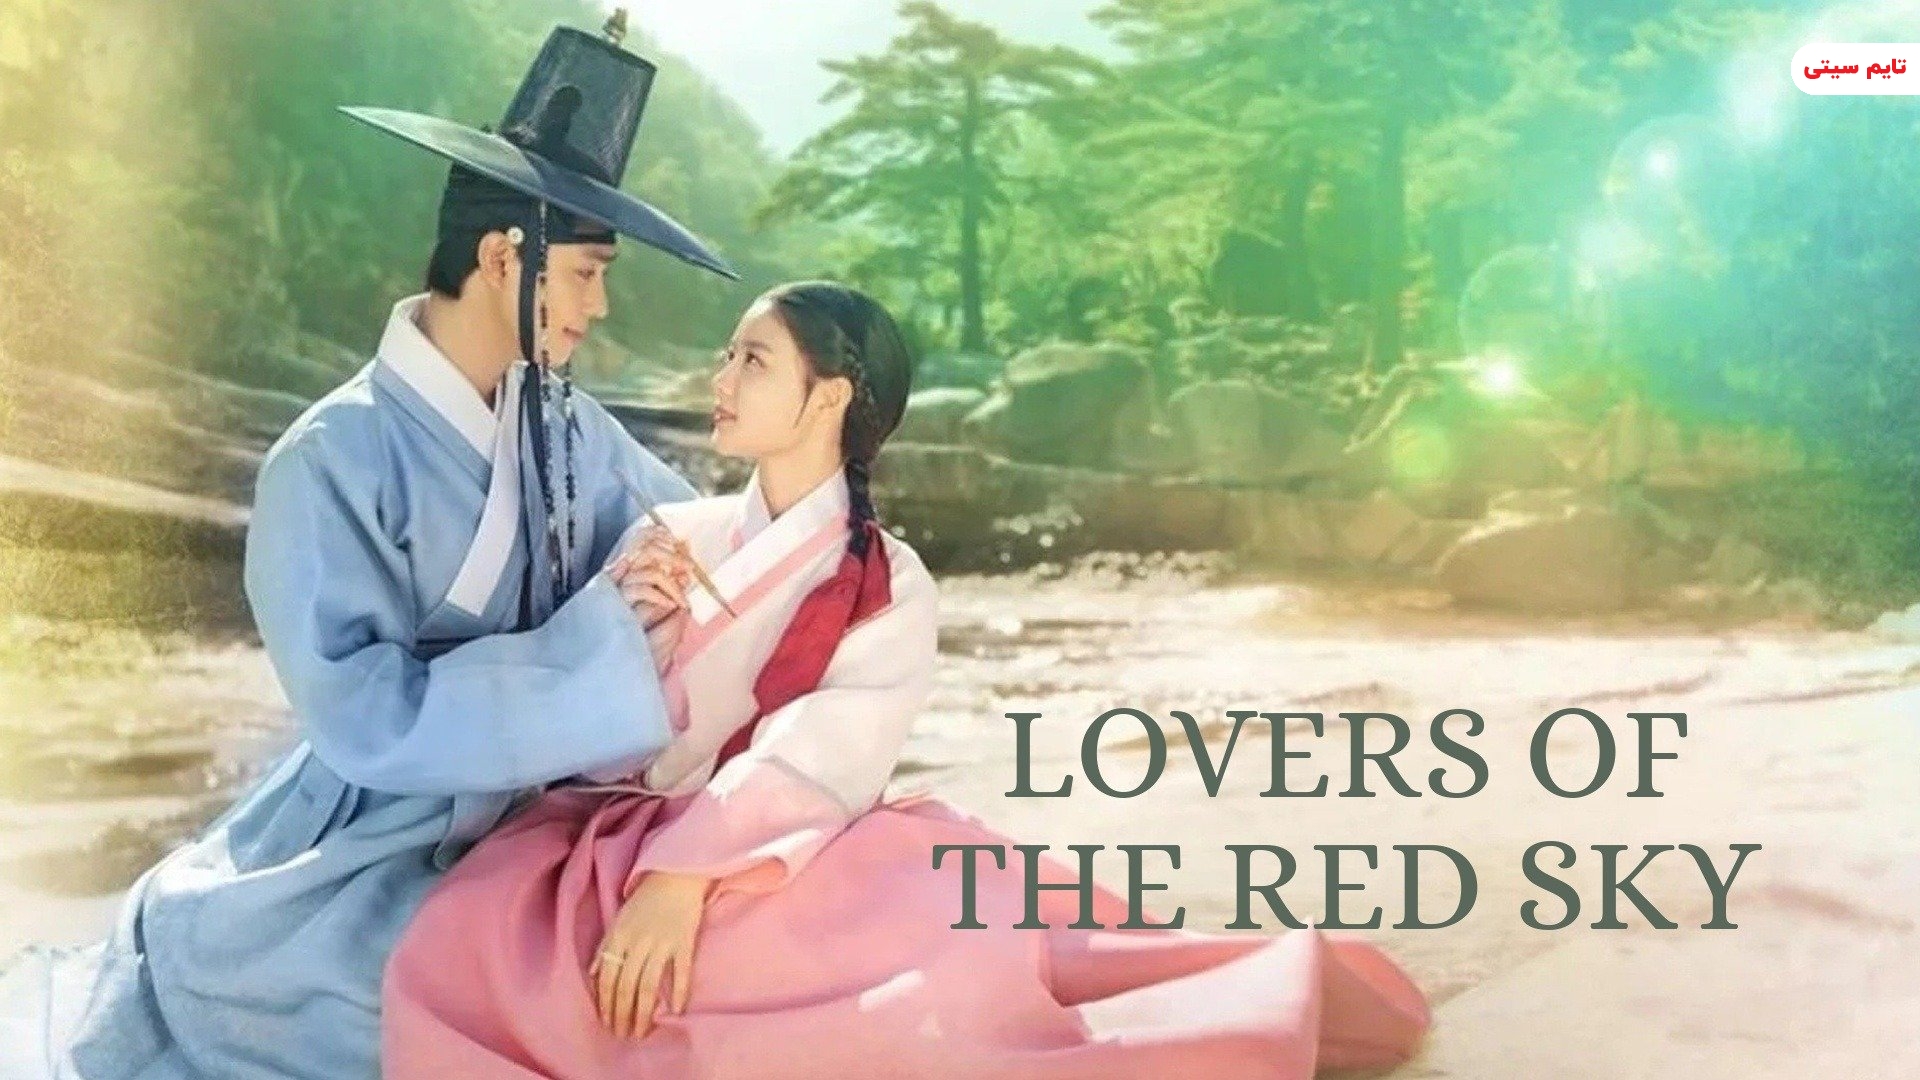 Lovers Of The Red Sky - عاشقان آسمان سرخ